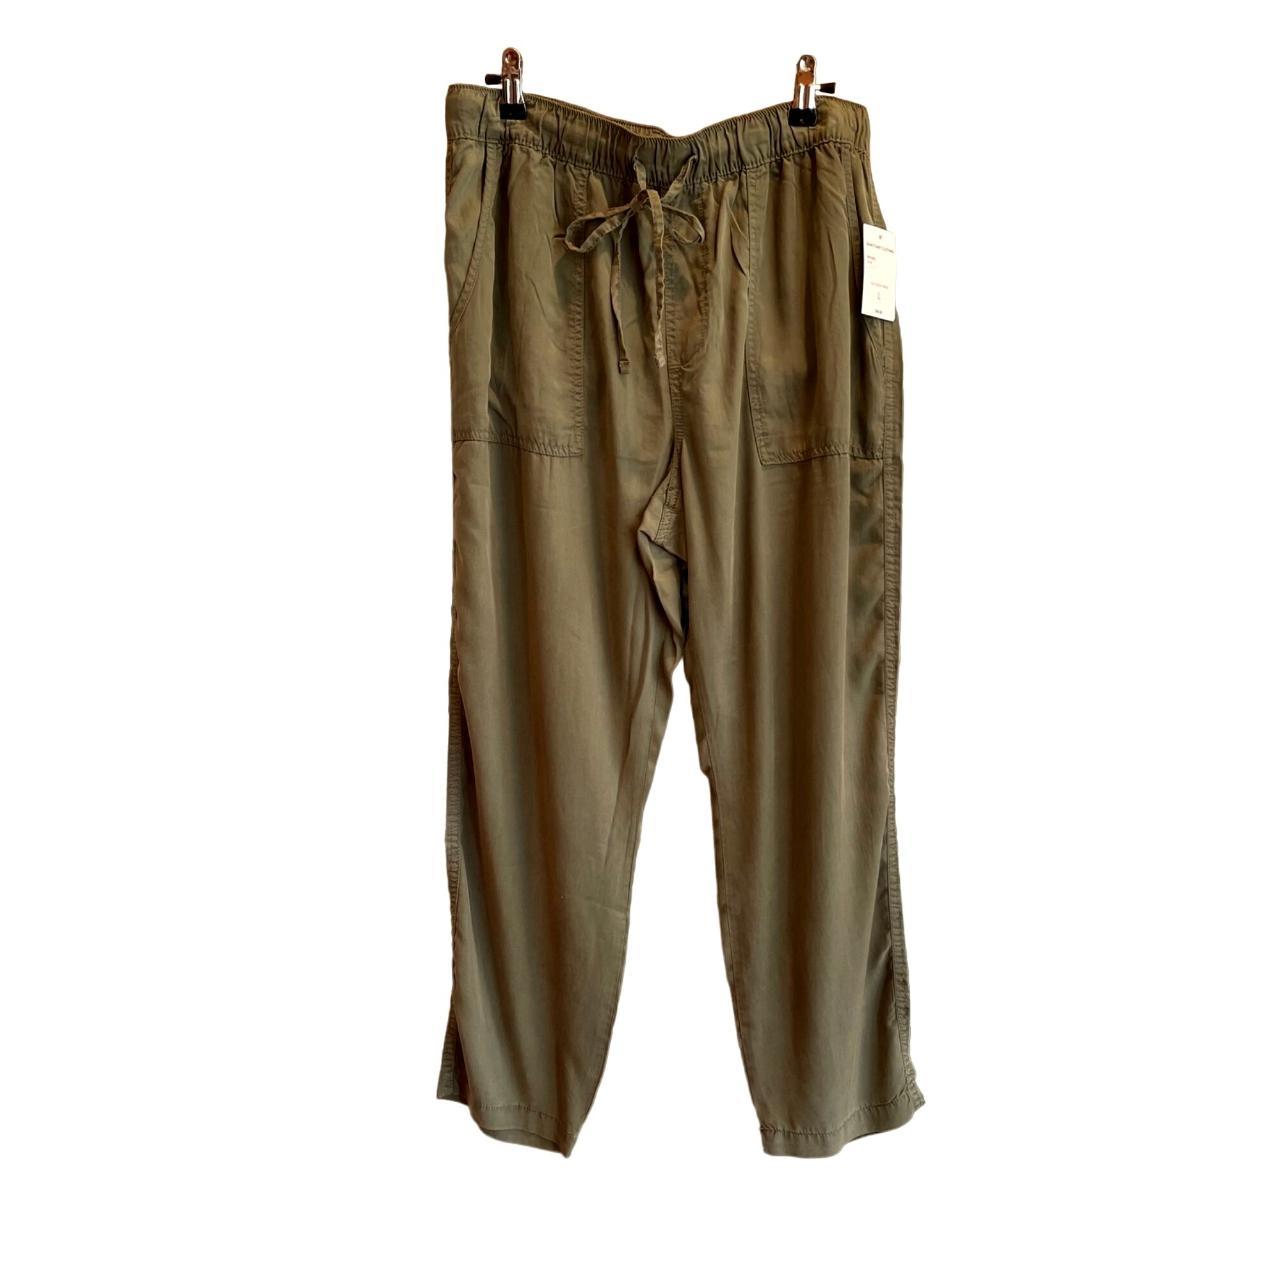 Sanctuary Go Easy Casual Flowy Olive Army Green Pant... - Depop